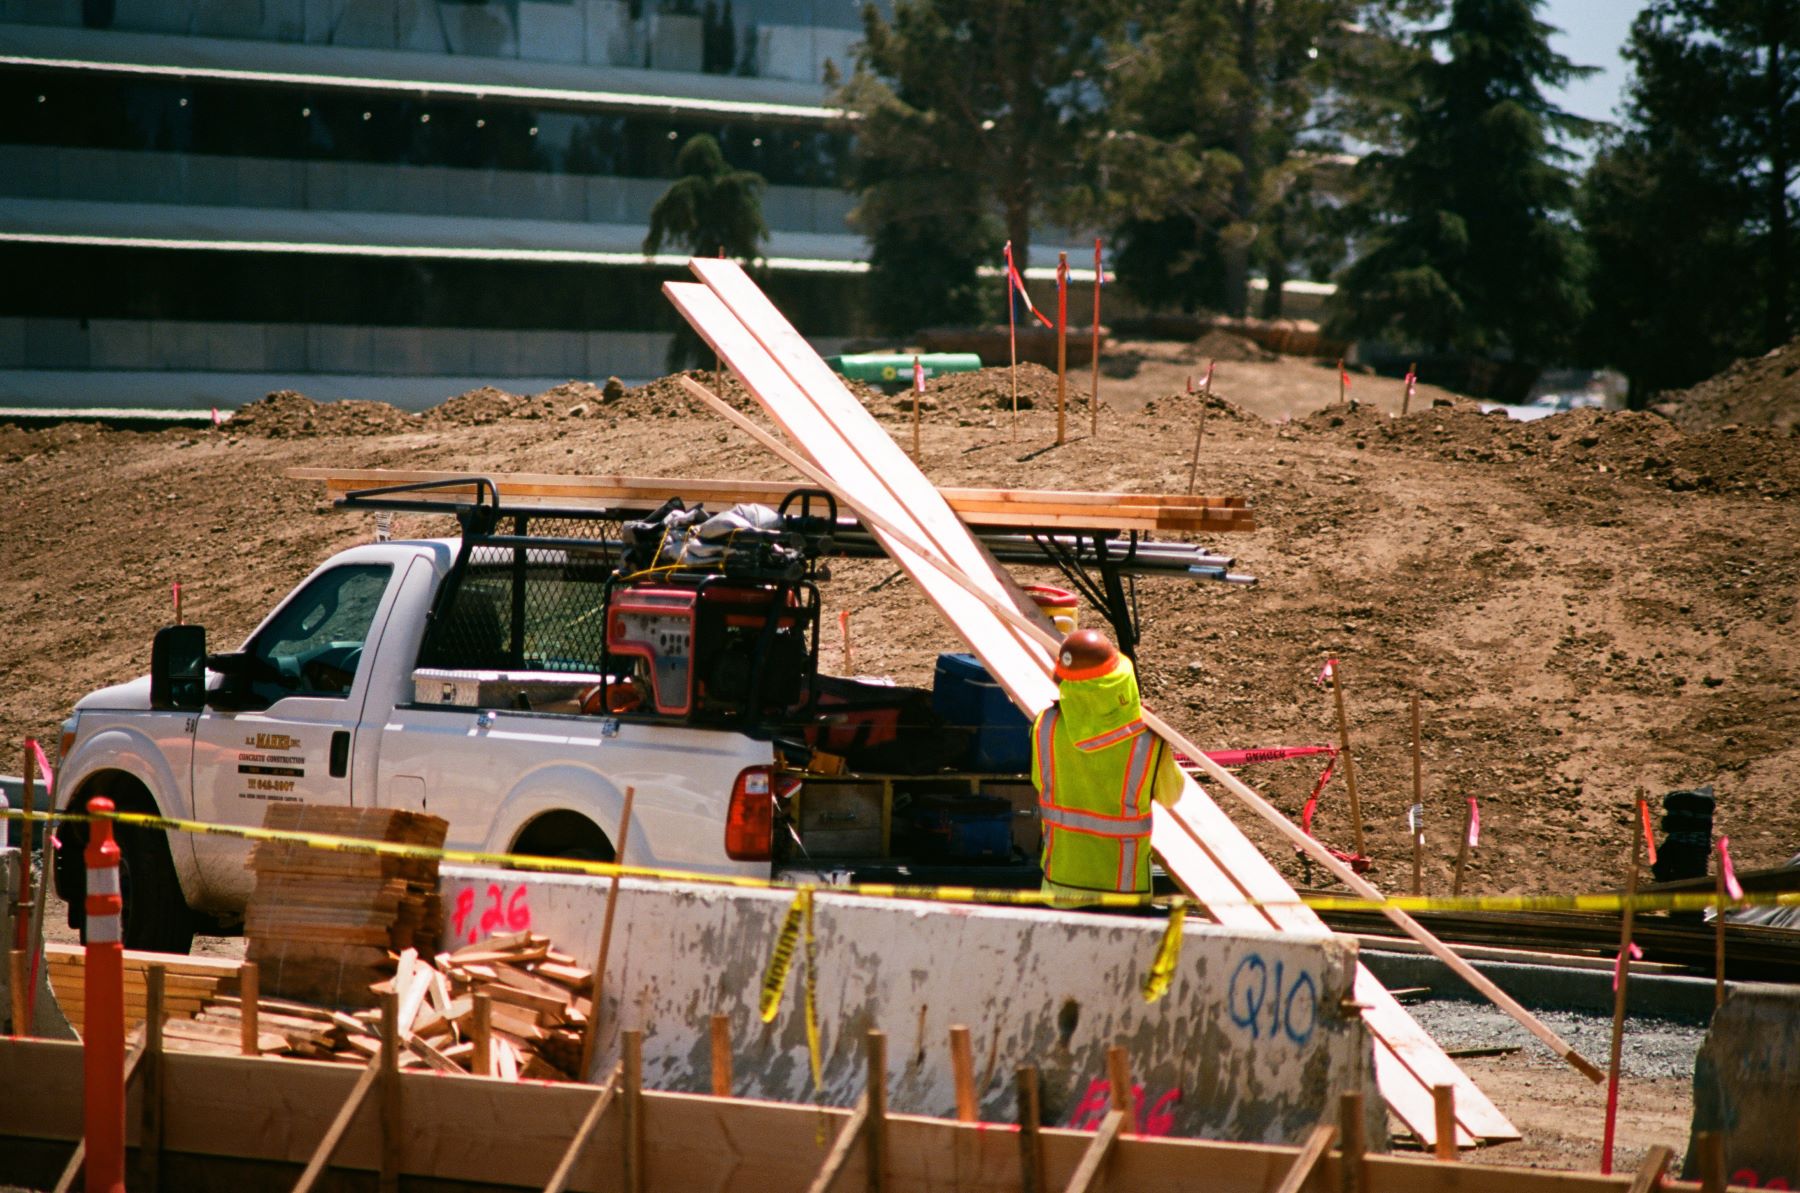 A construction worker loading up a pickup truck with equipment and materials